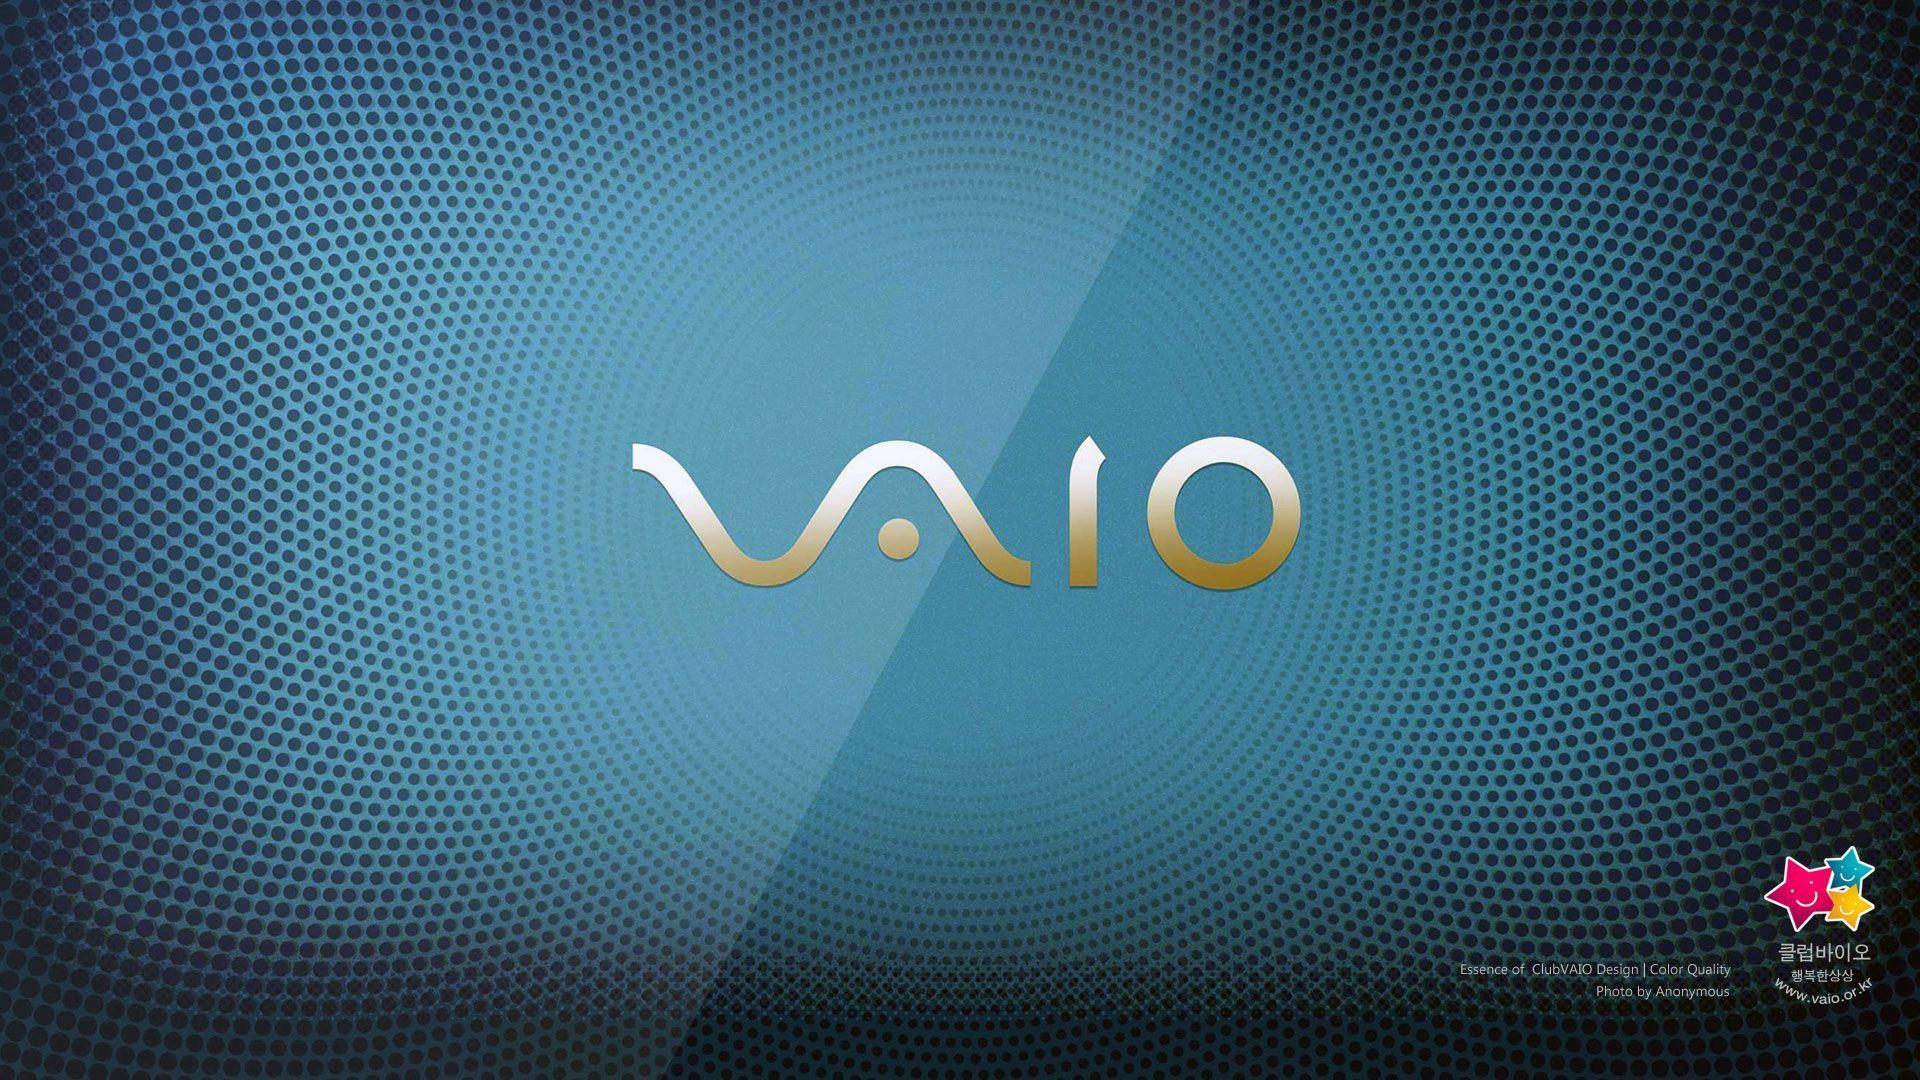 Sony Vaio Wallpapers  Wallpaper Cave